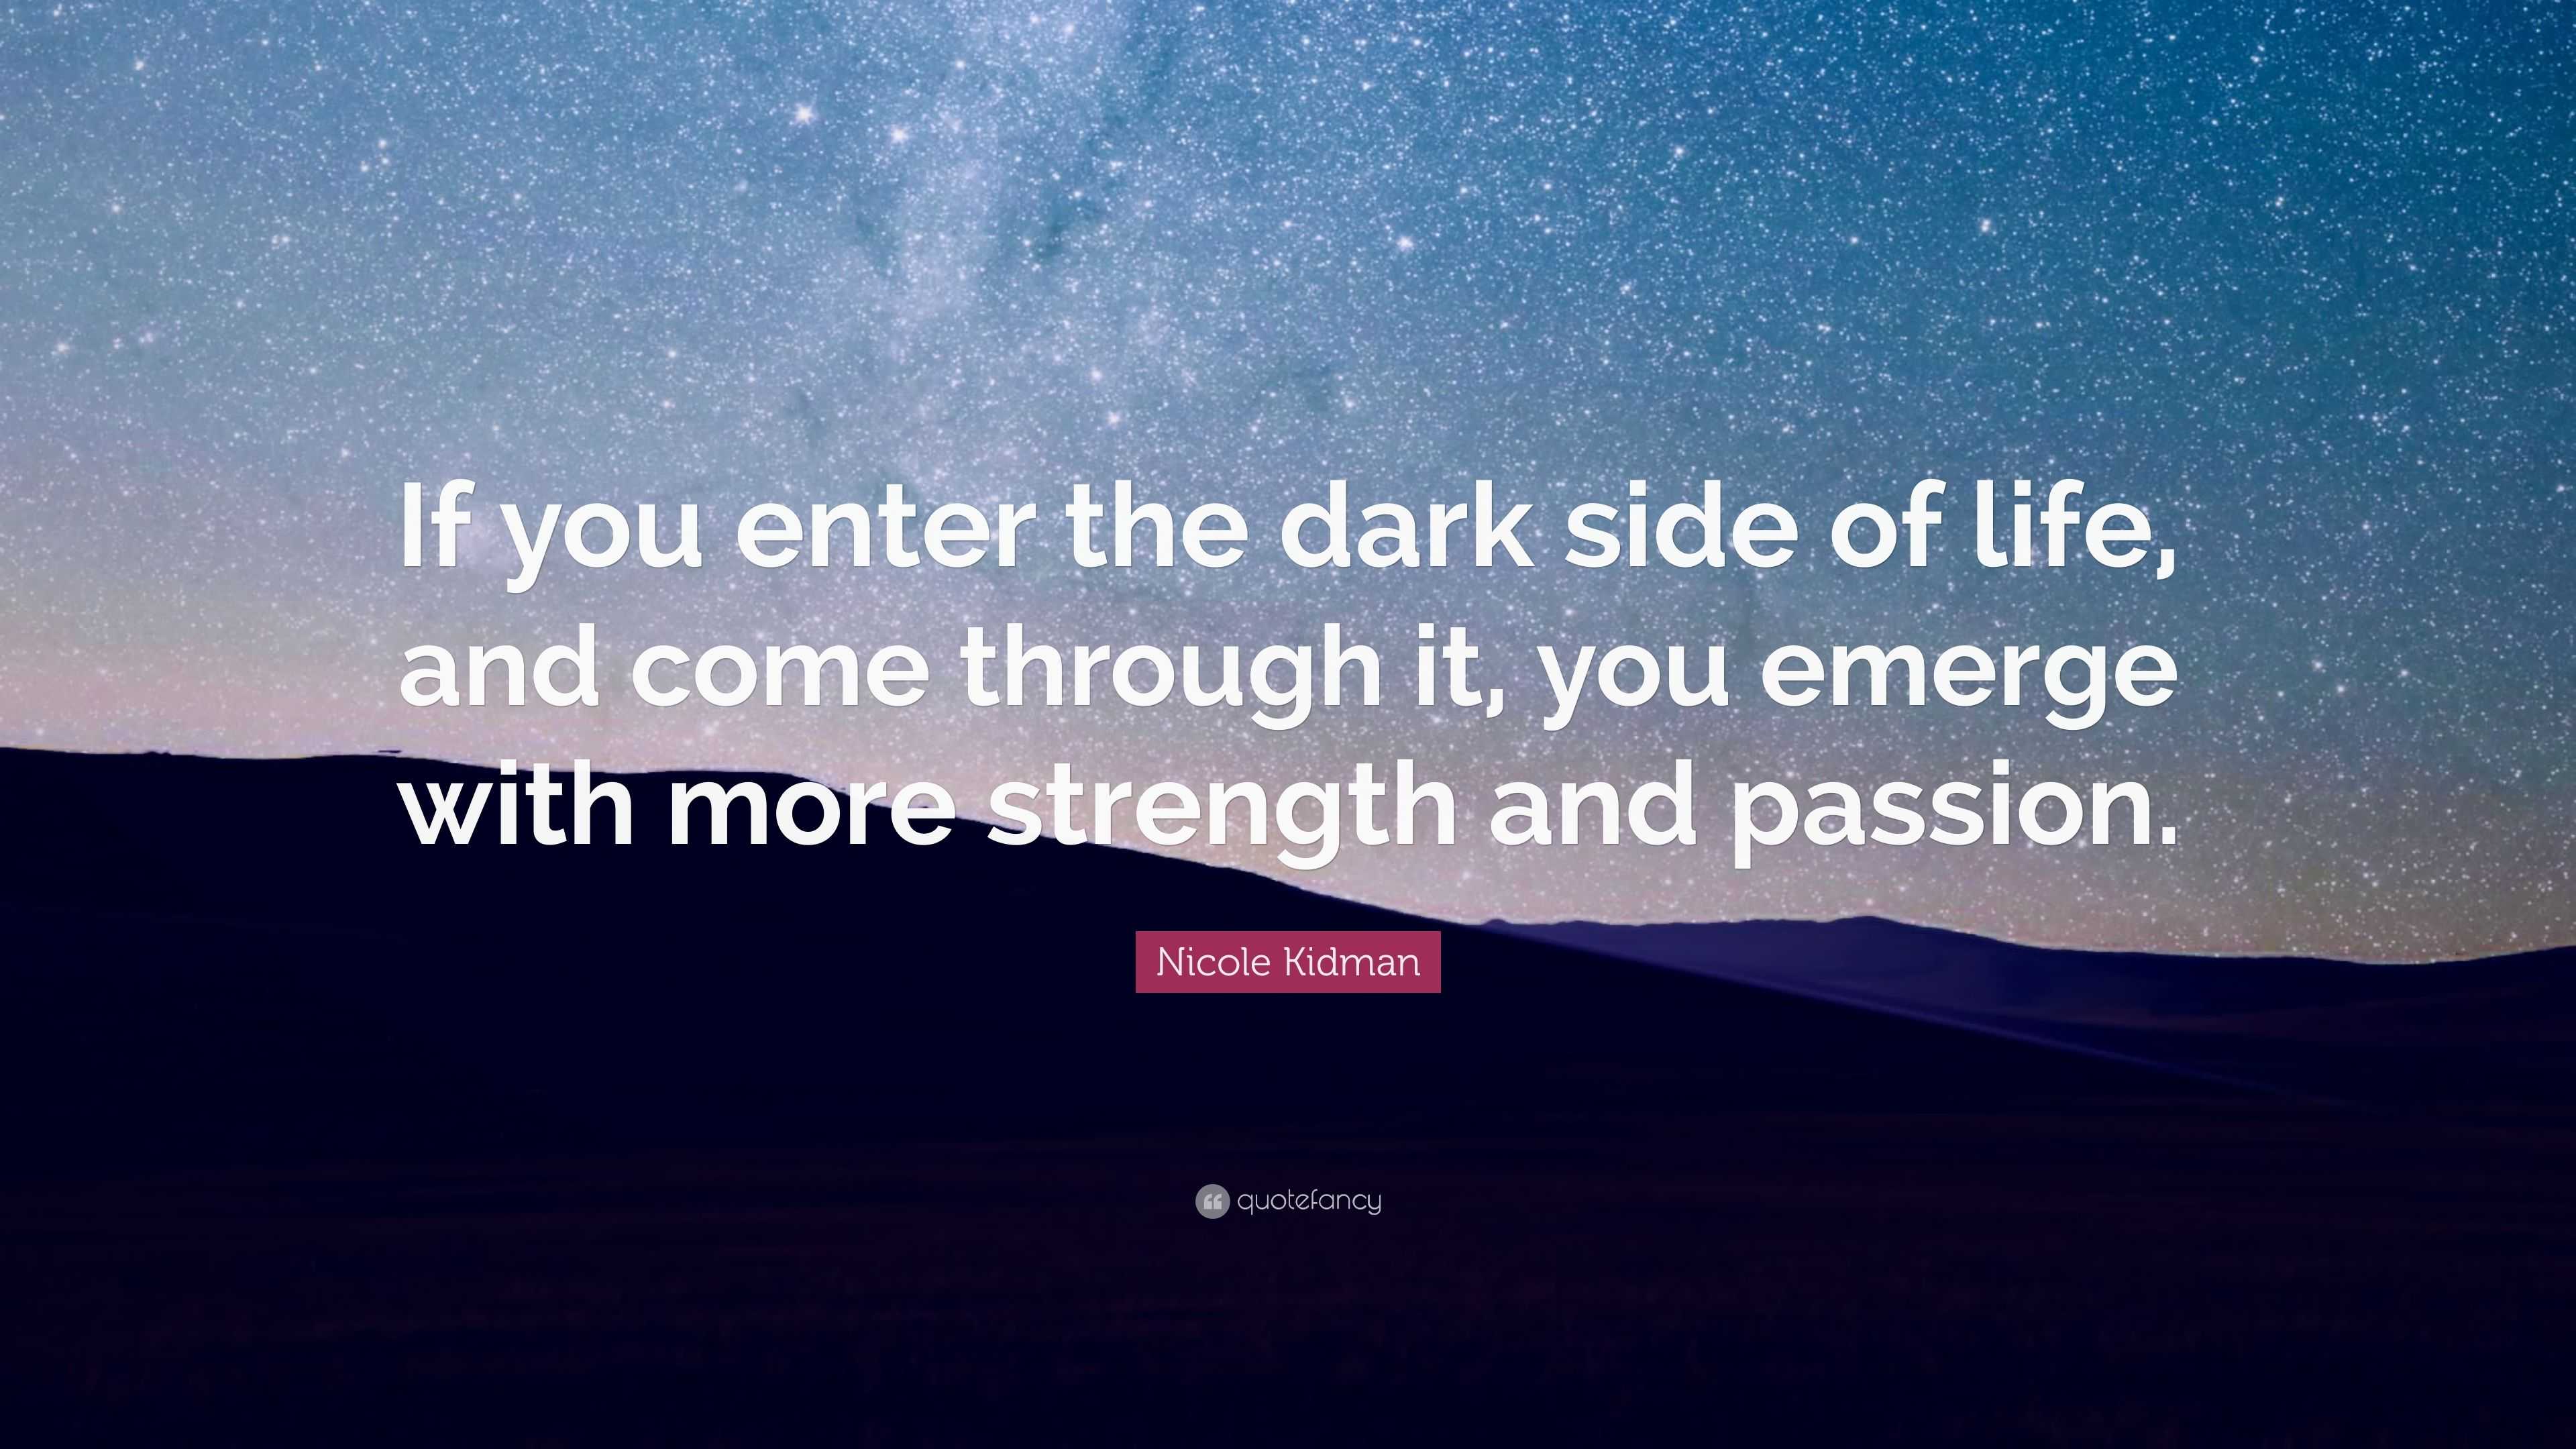 Nicole Kidman Quote: “If you enter the dark side of life, and come ...